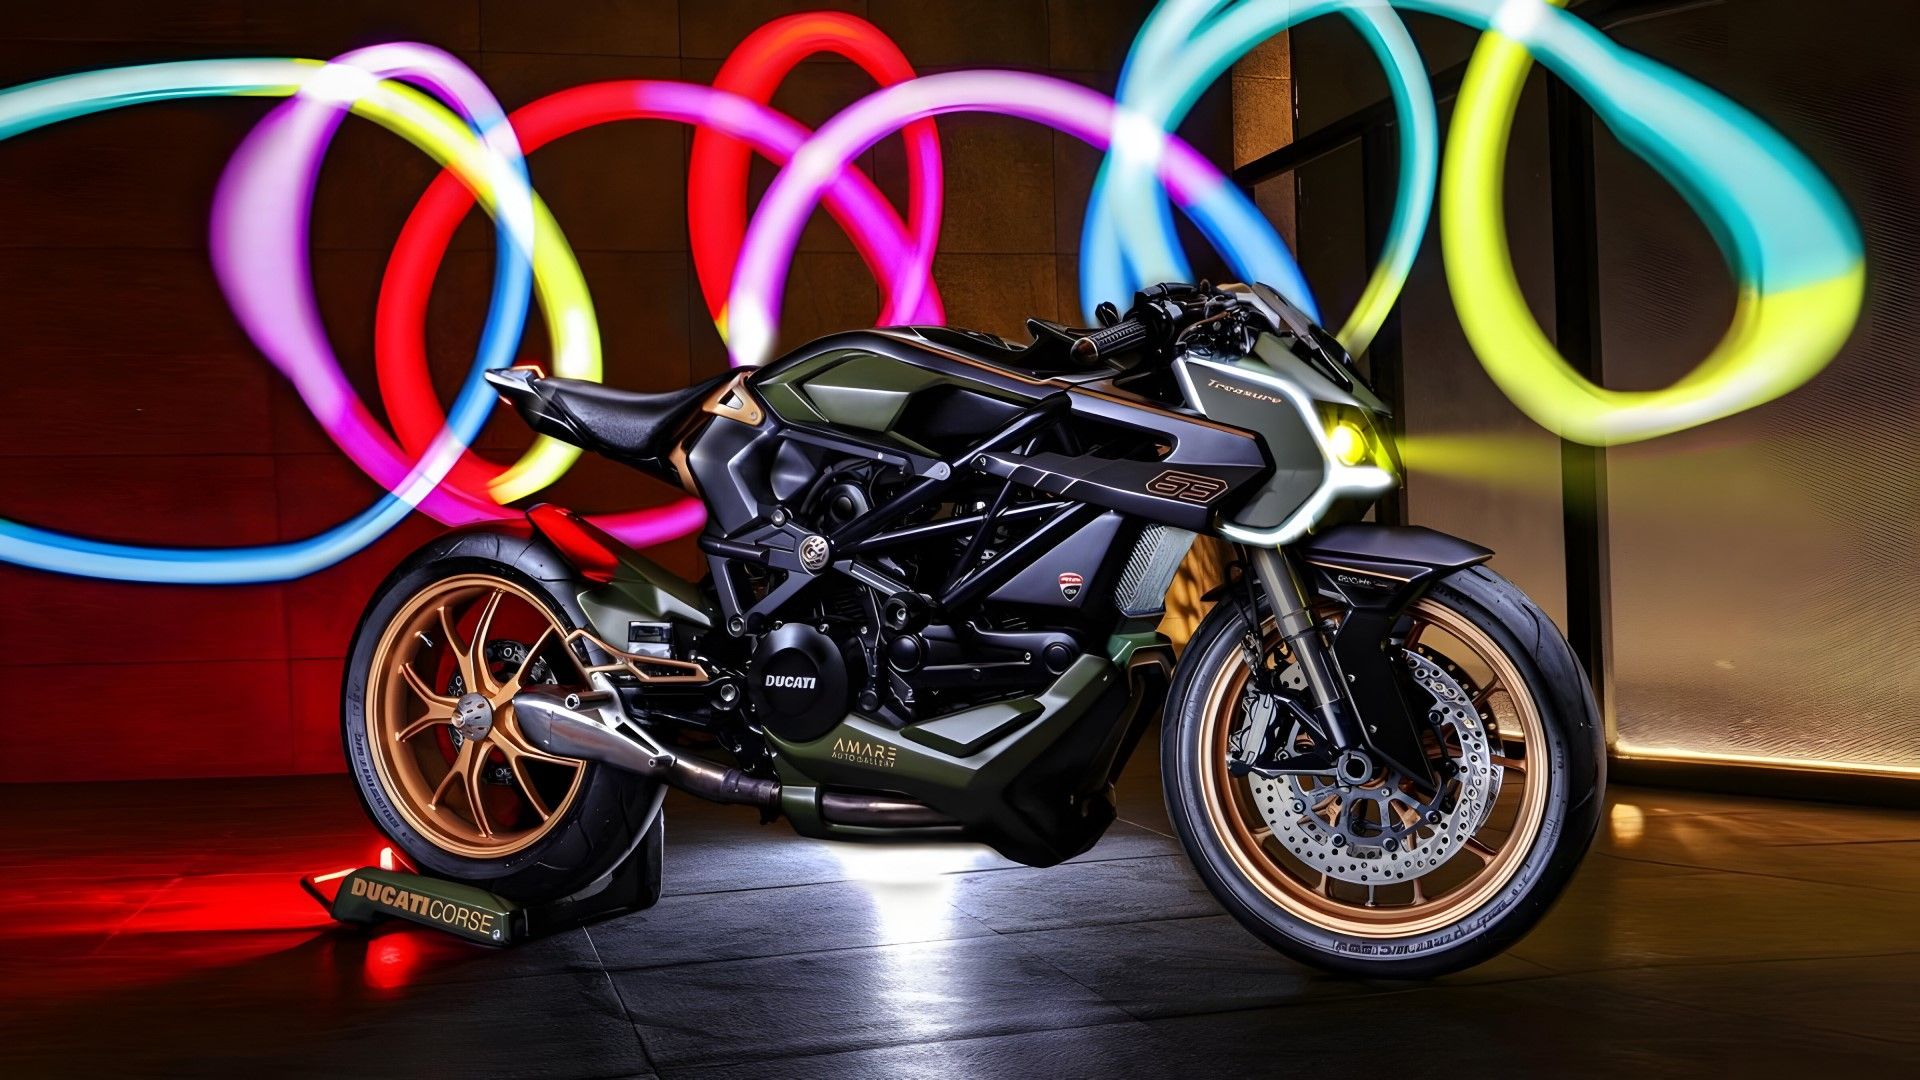 Lambo Inspired by Cafe Racer A 10-Year-Old Ducati Underneath (Via Ducati)